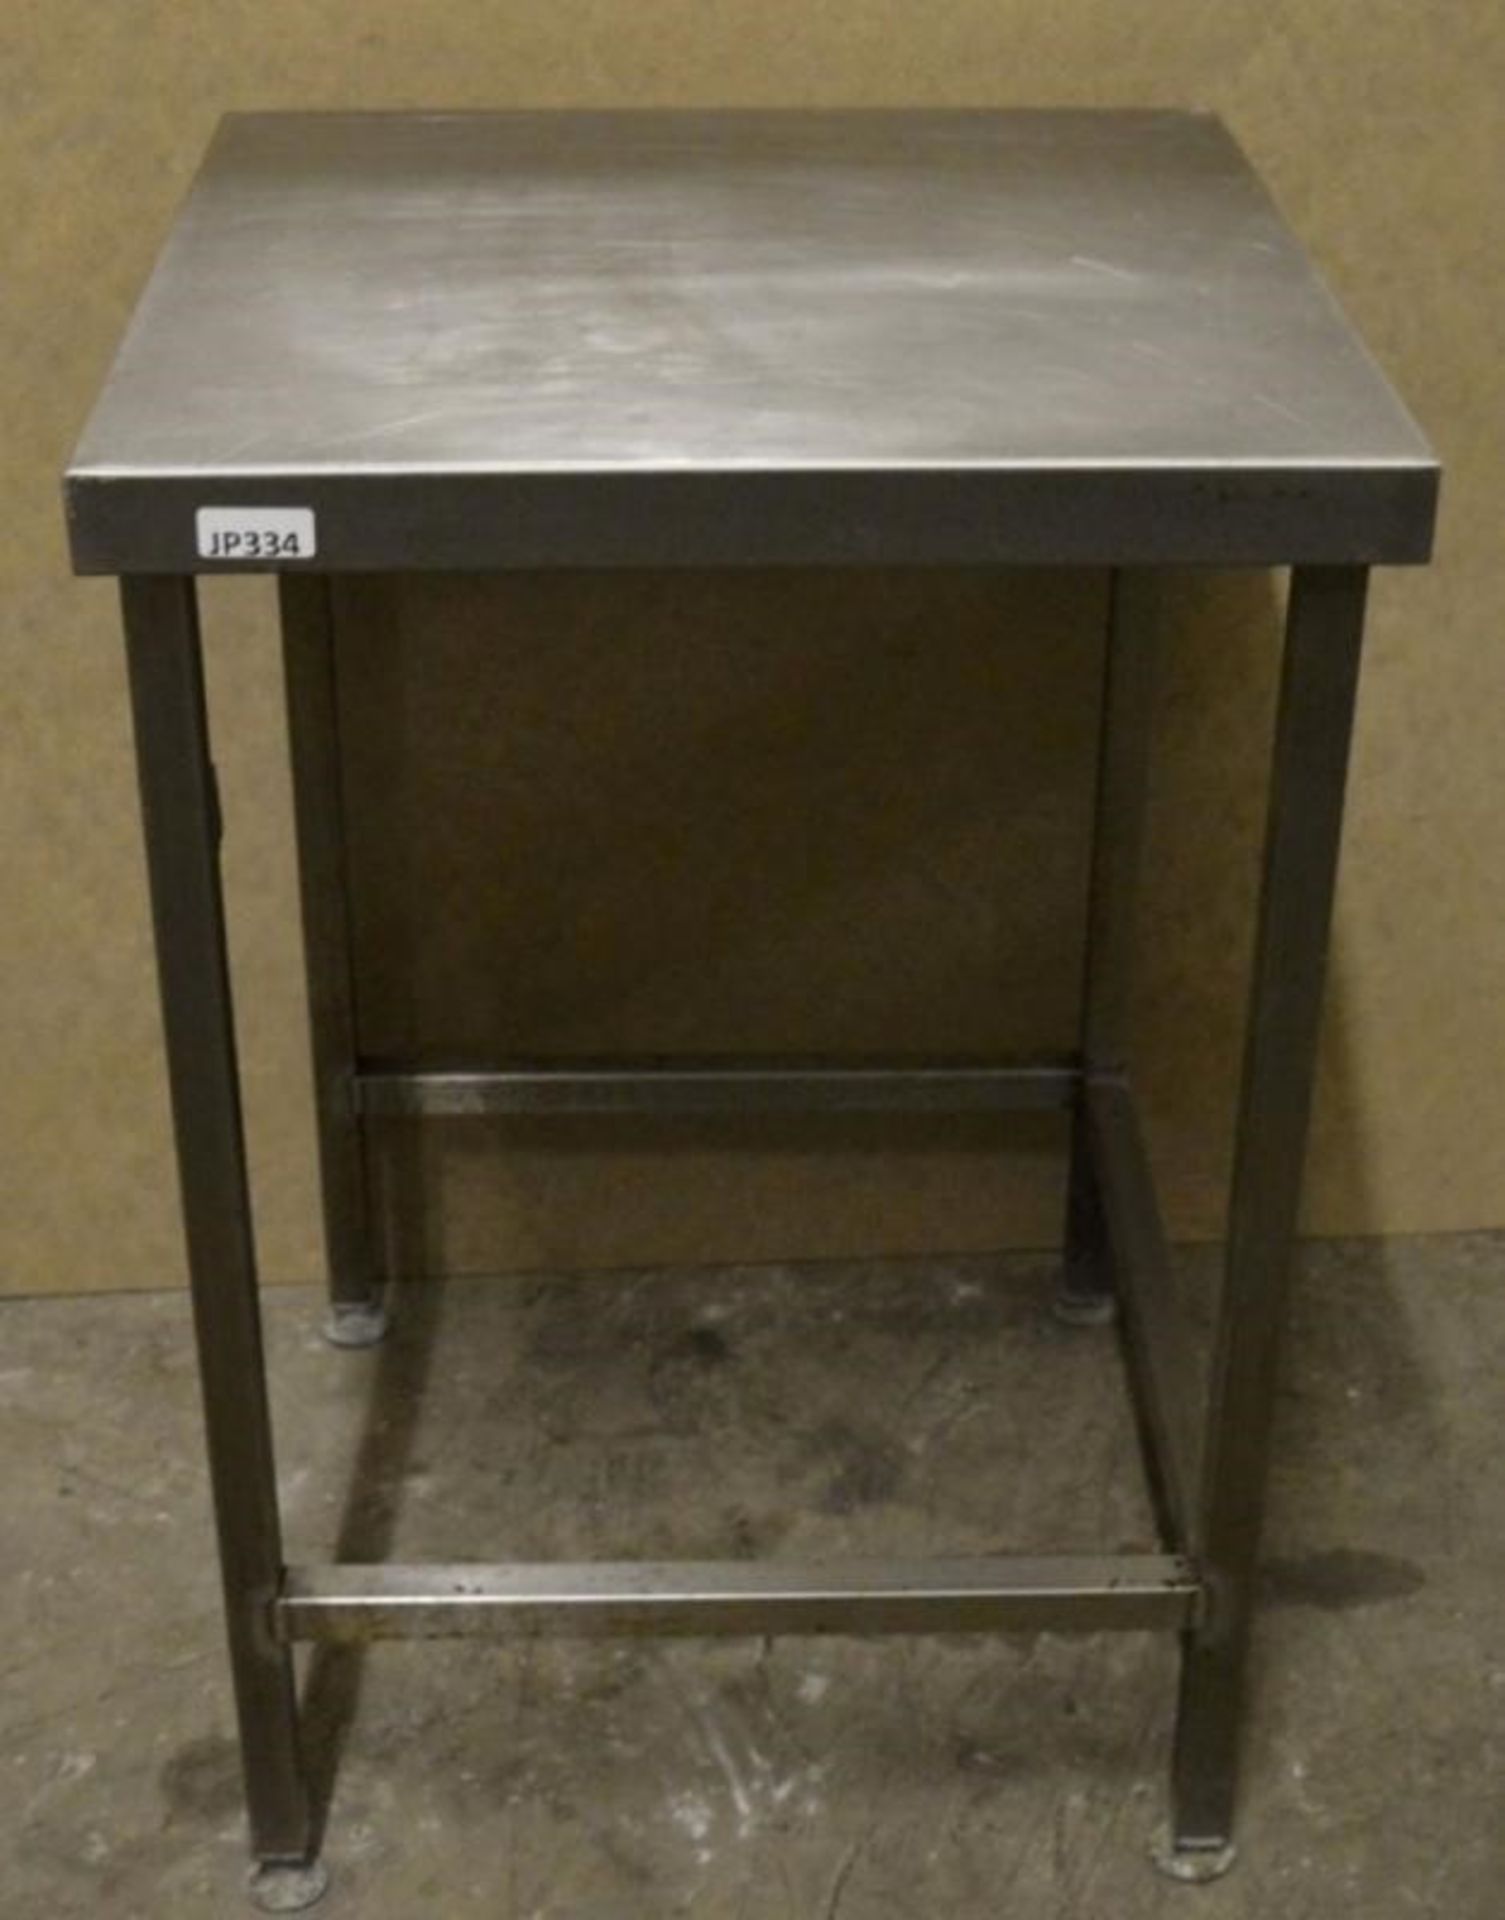 1 x Stainless Steel Prep Table - H88 x W60 x D60 cms - CL282 - Ref JP334 - Location: Bolton BL1